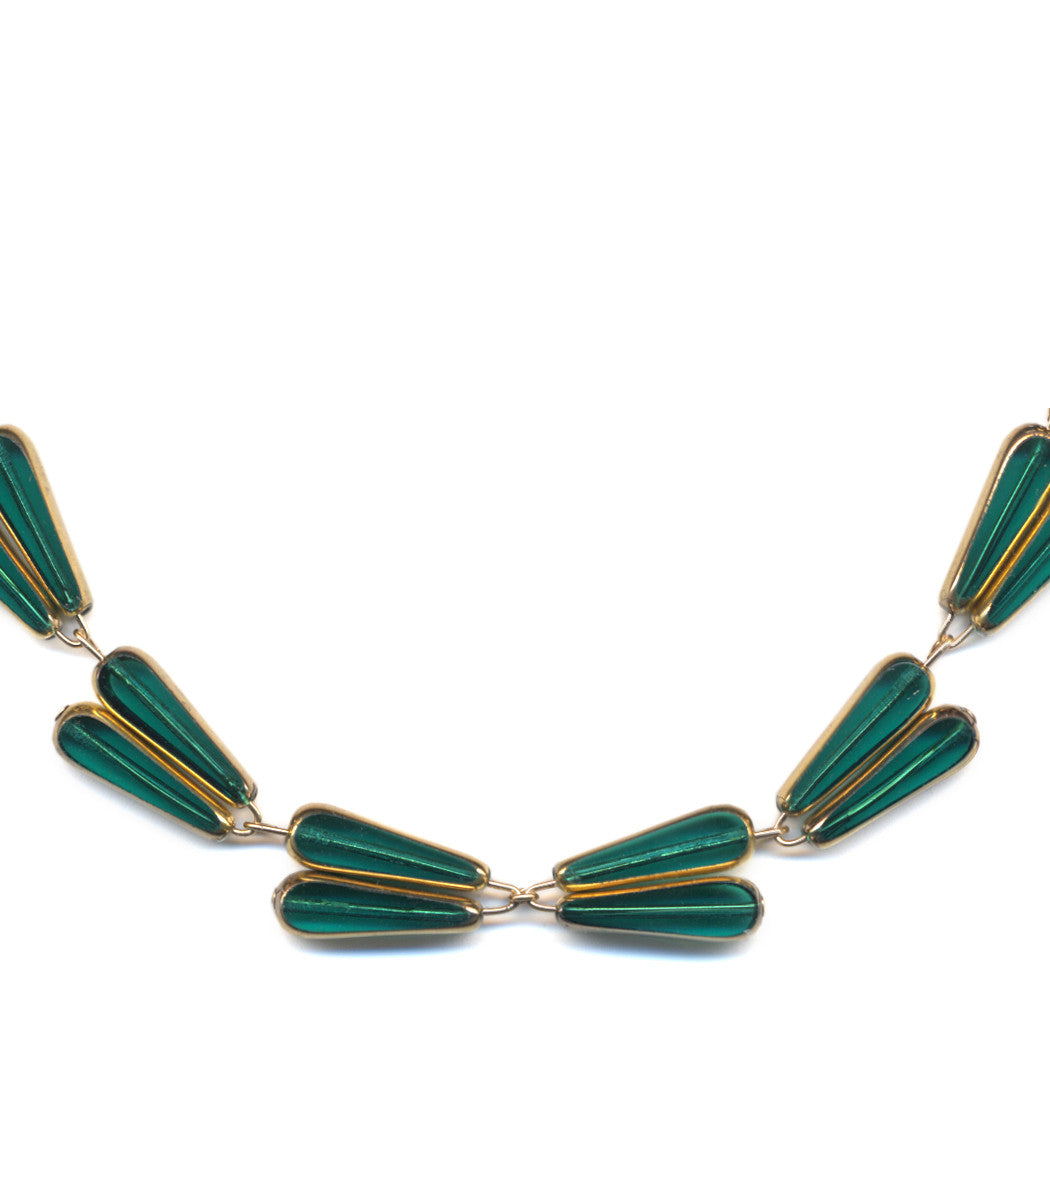 N1960 Teal Laurel Necklace by I. Ronni Kappos